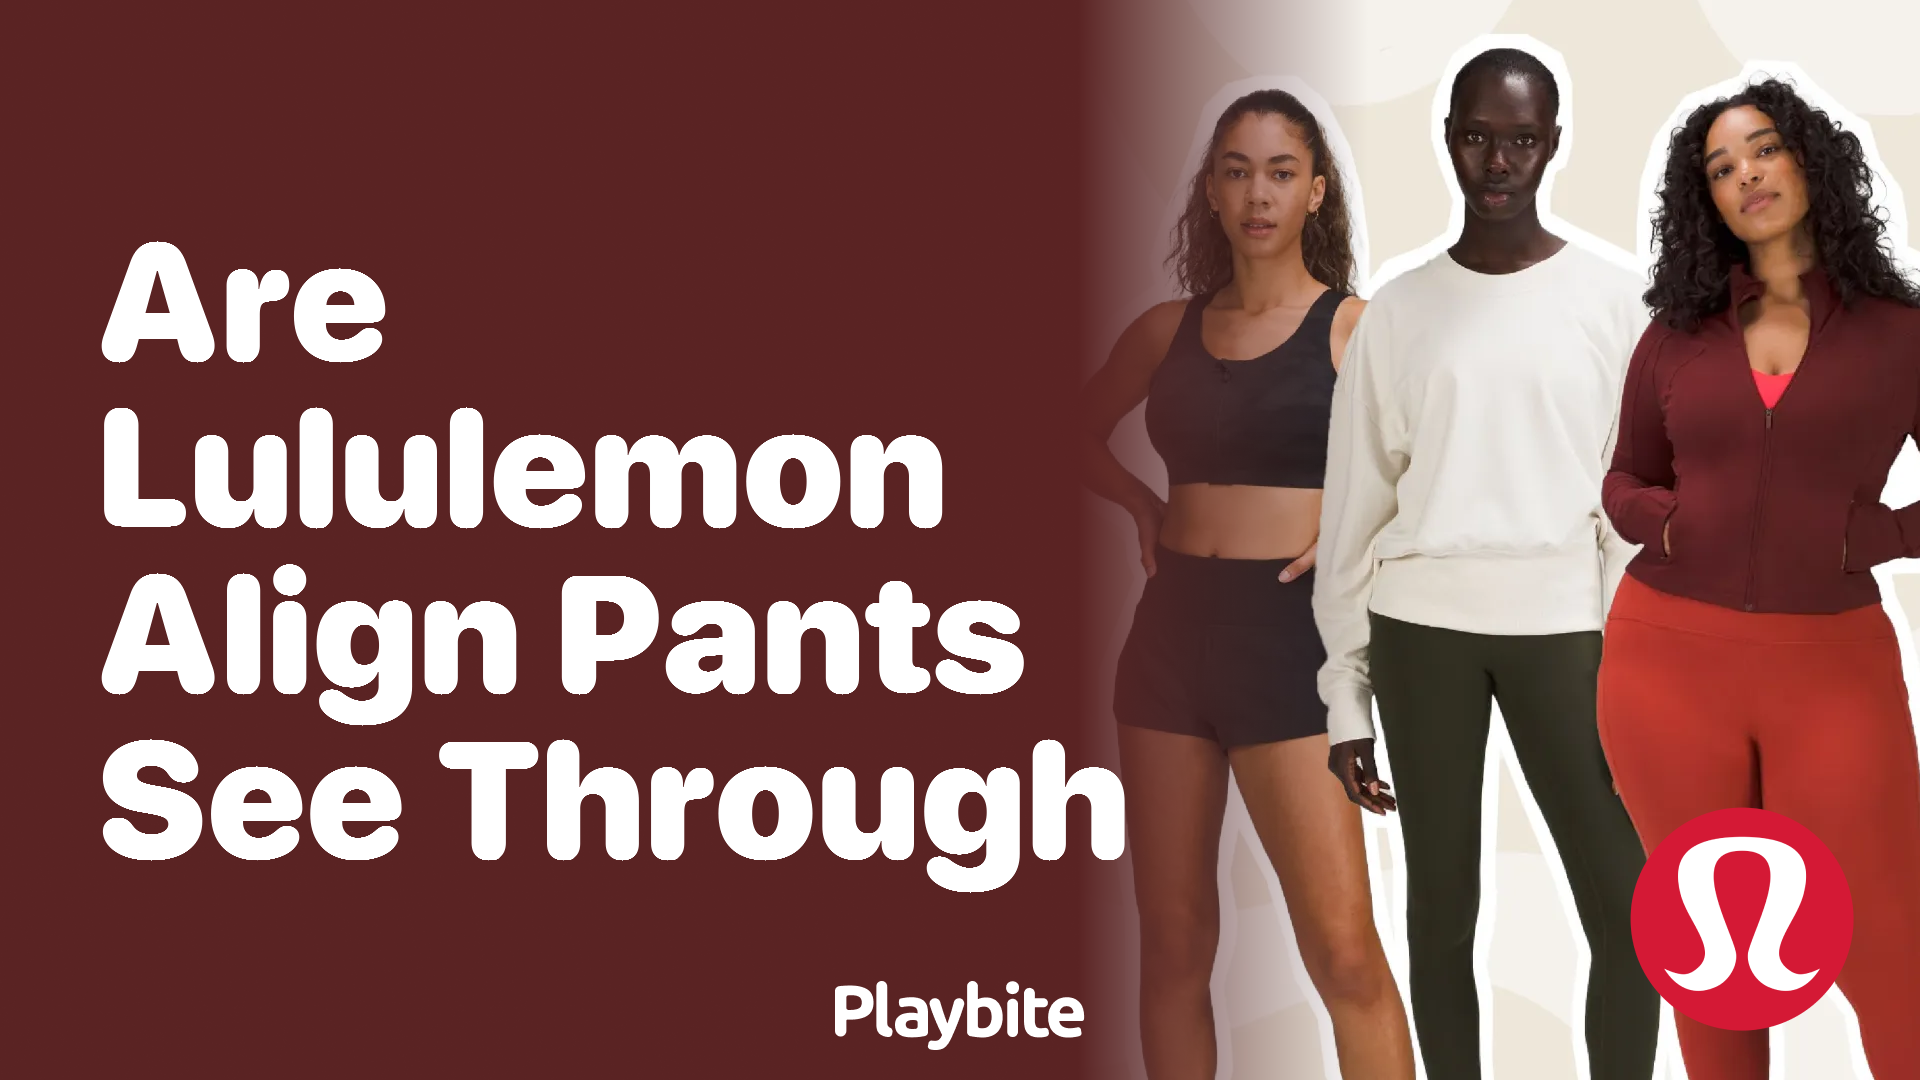 Are Lululemon Align Pants See-Through? Let's Find Out! - Playbite